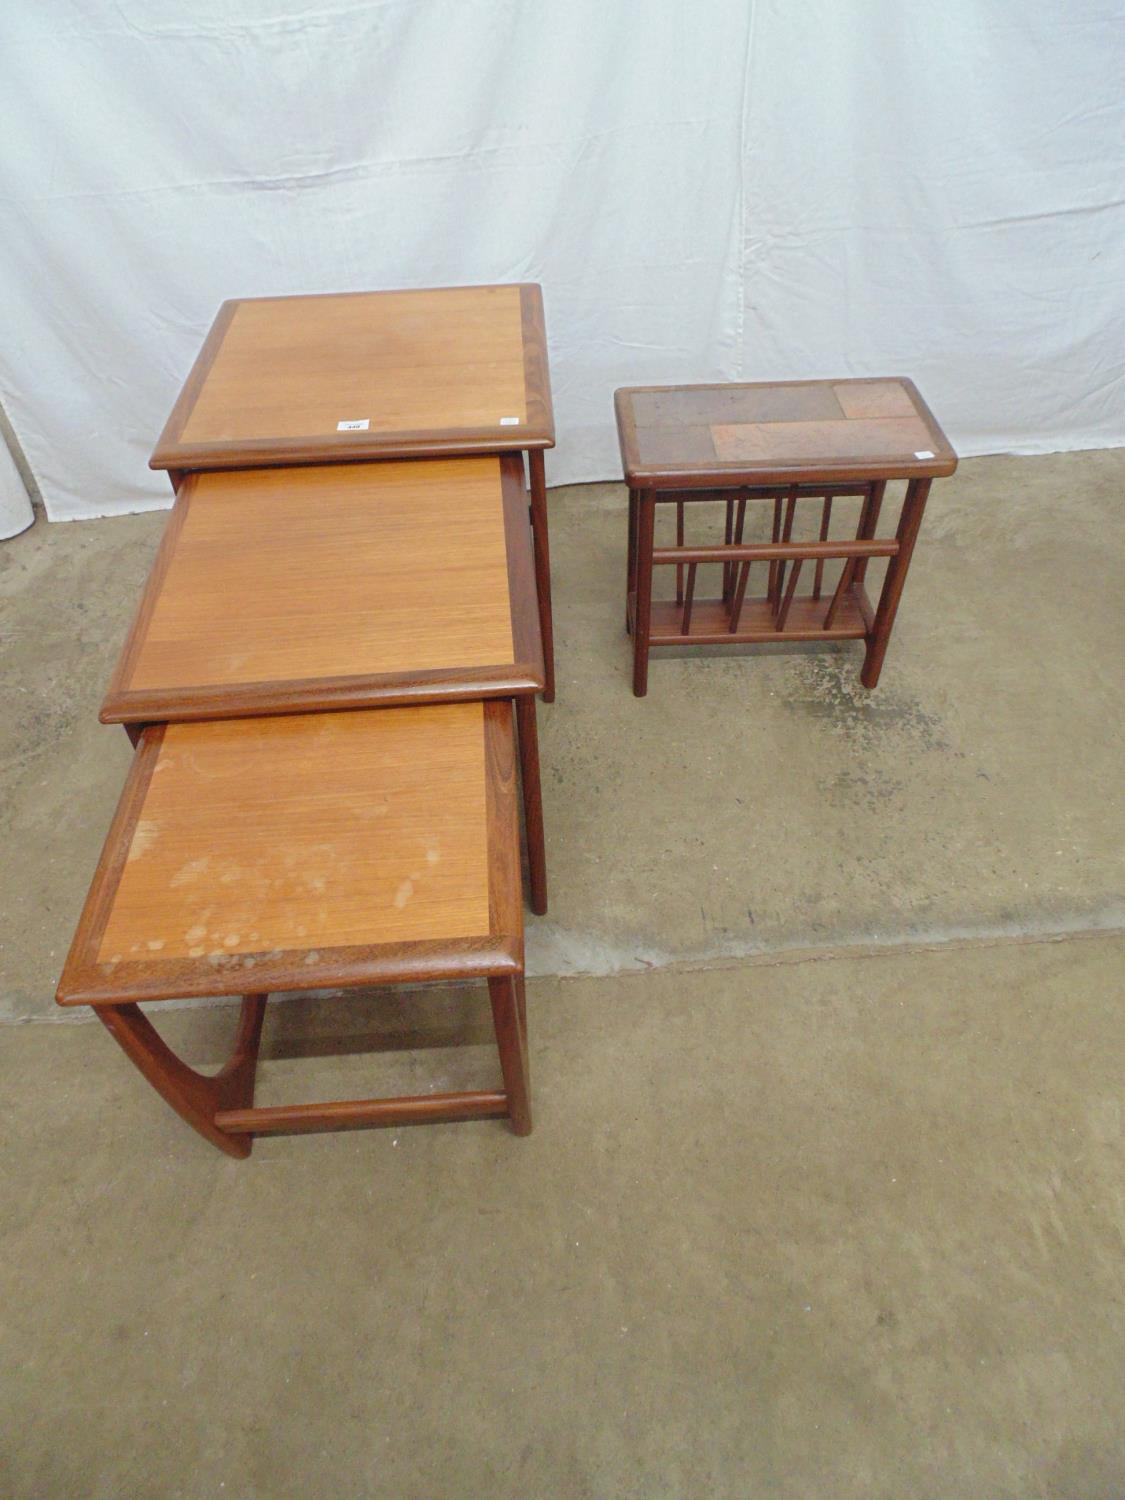 Possibly G Plan Astro (no label) nest of three tables - 50cm x 50cm x 52cm tall together with a teak